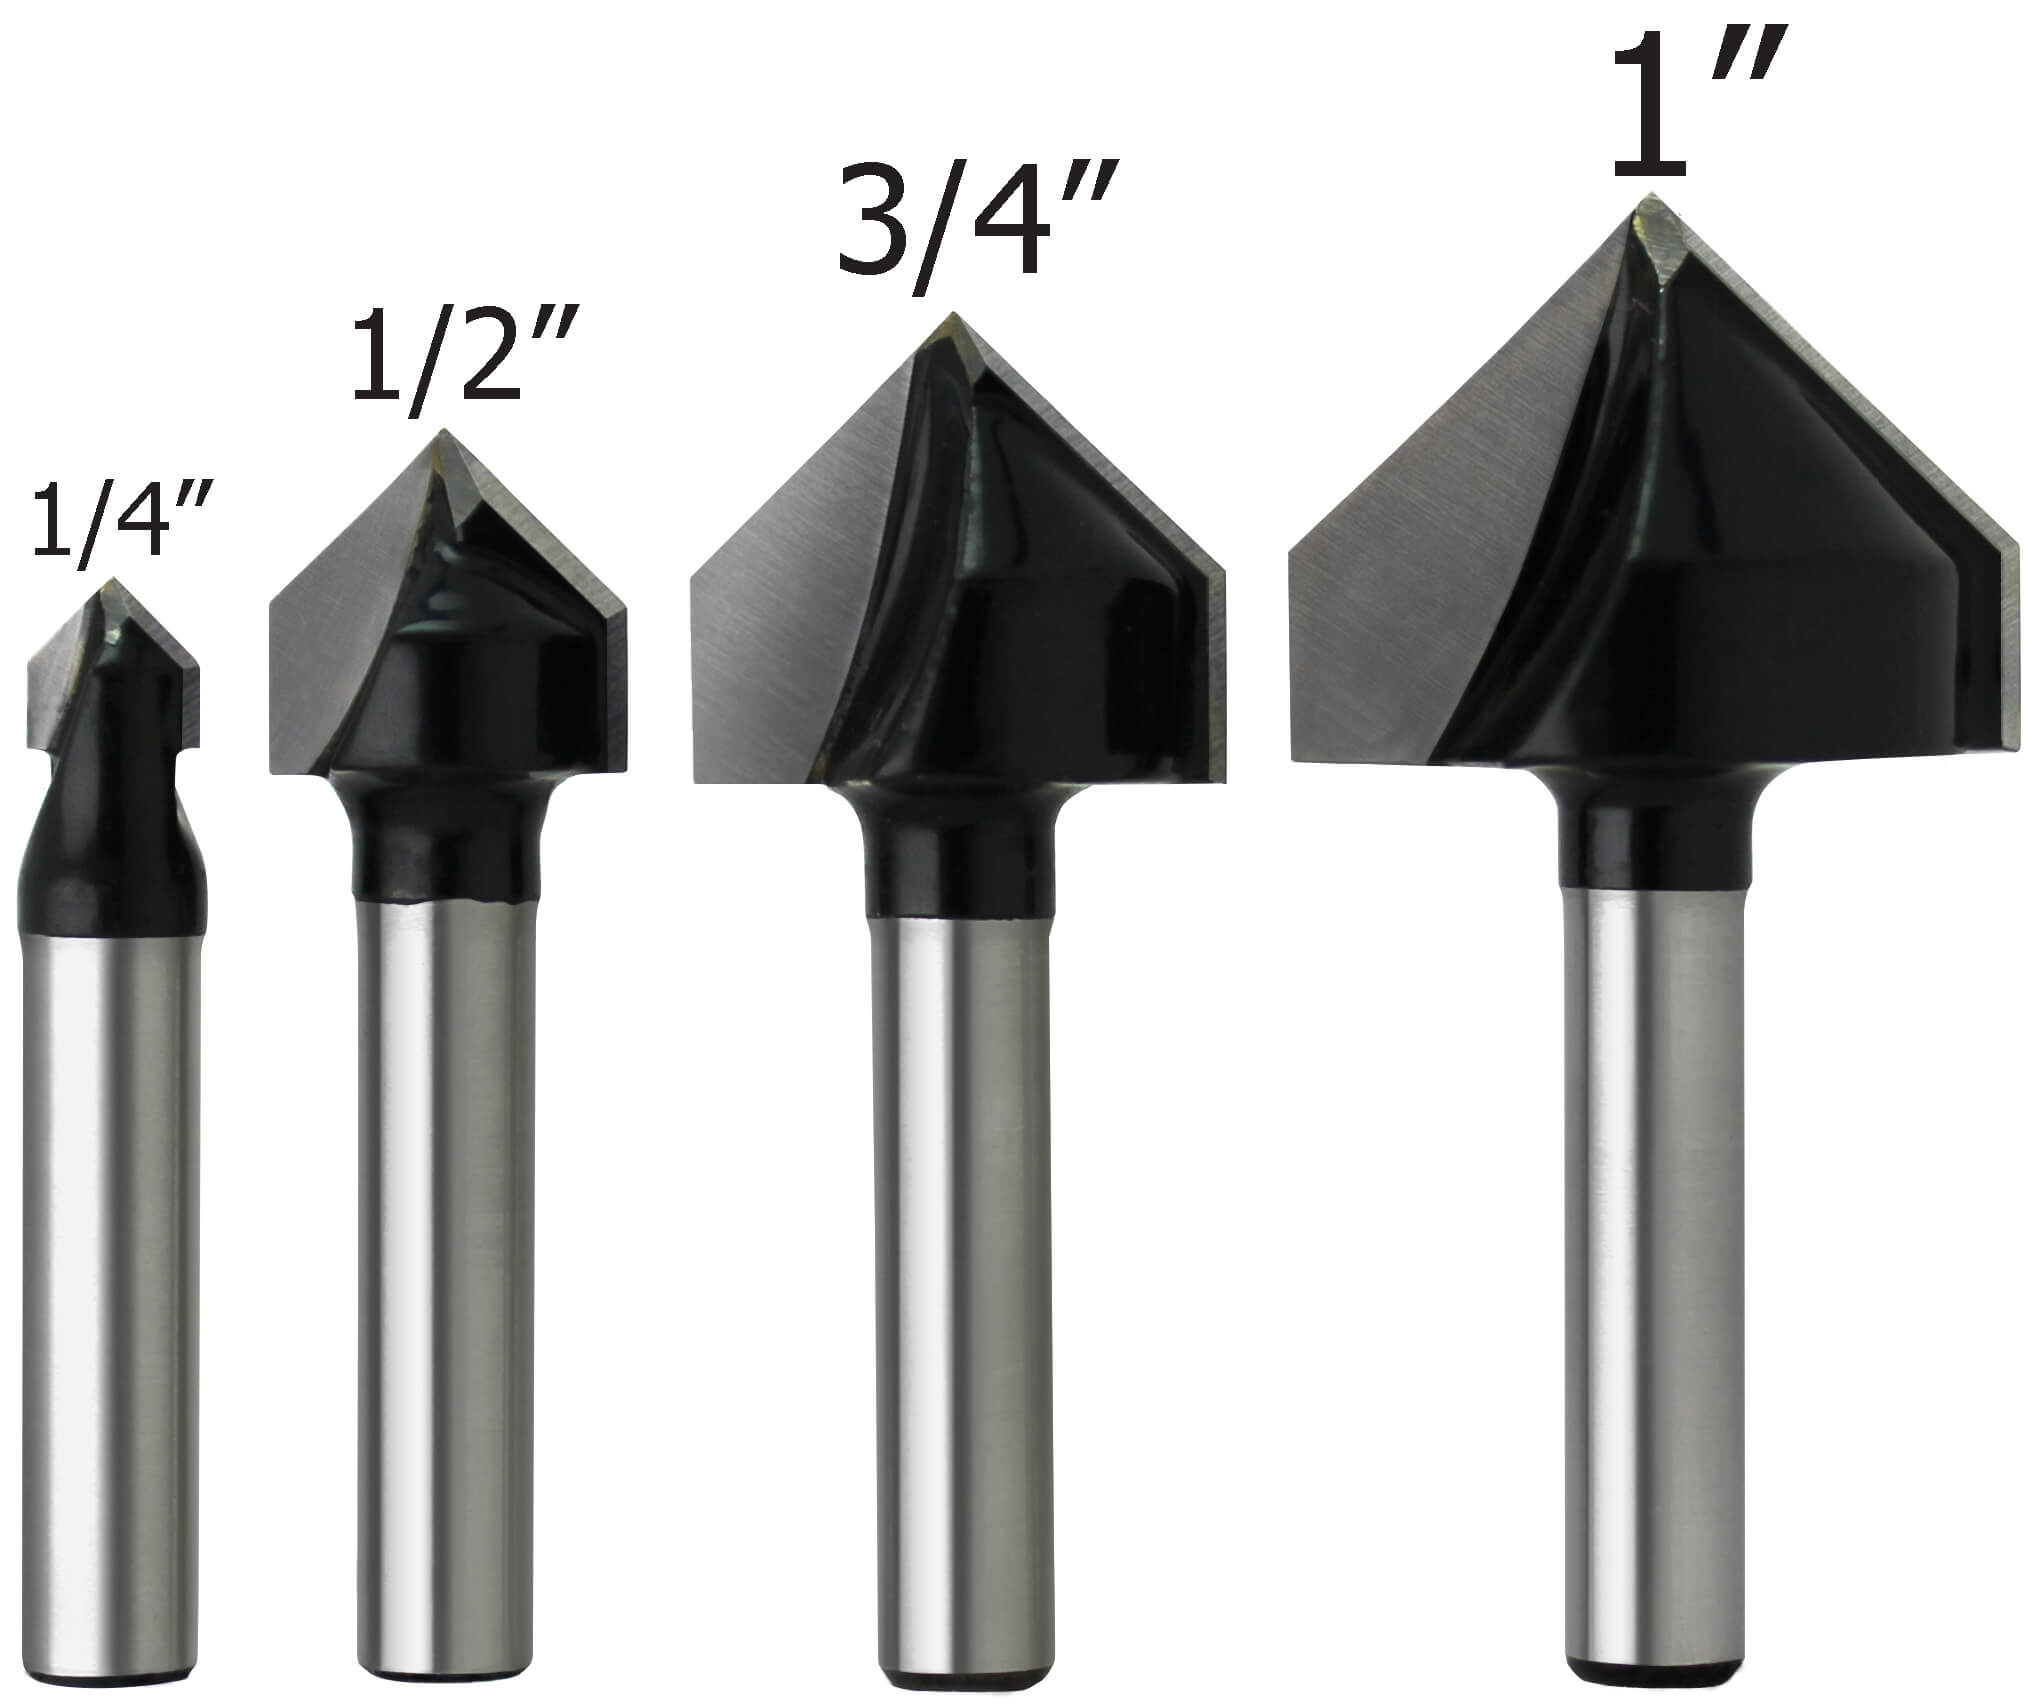 Details about   DashHound V Groove Engraving Bit CNC Router Bits 60 Deg With 1/4 Inch Shank Hard 